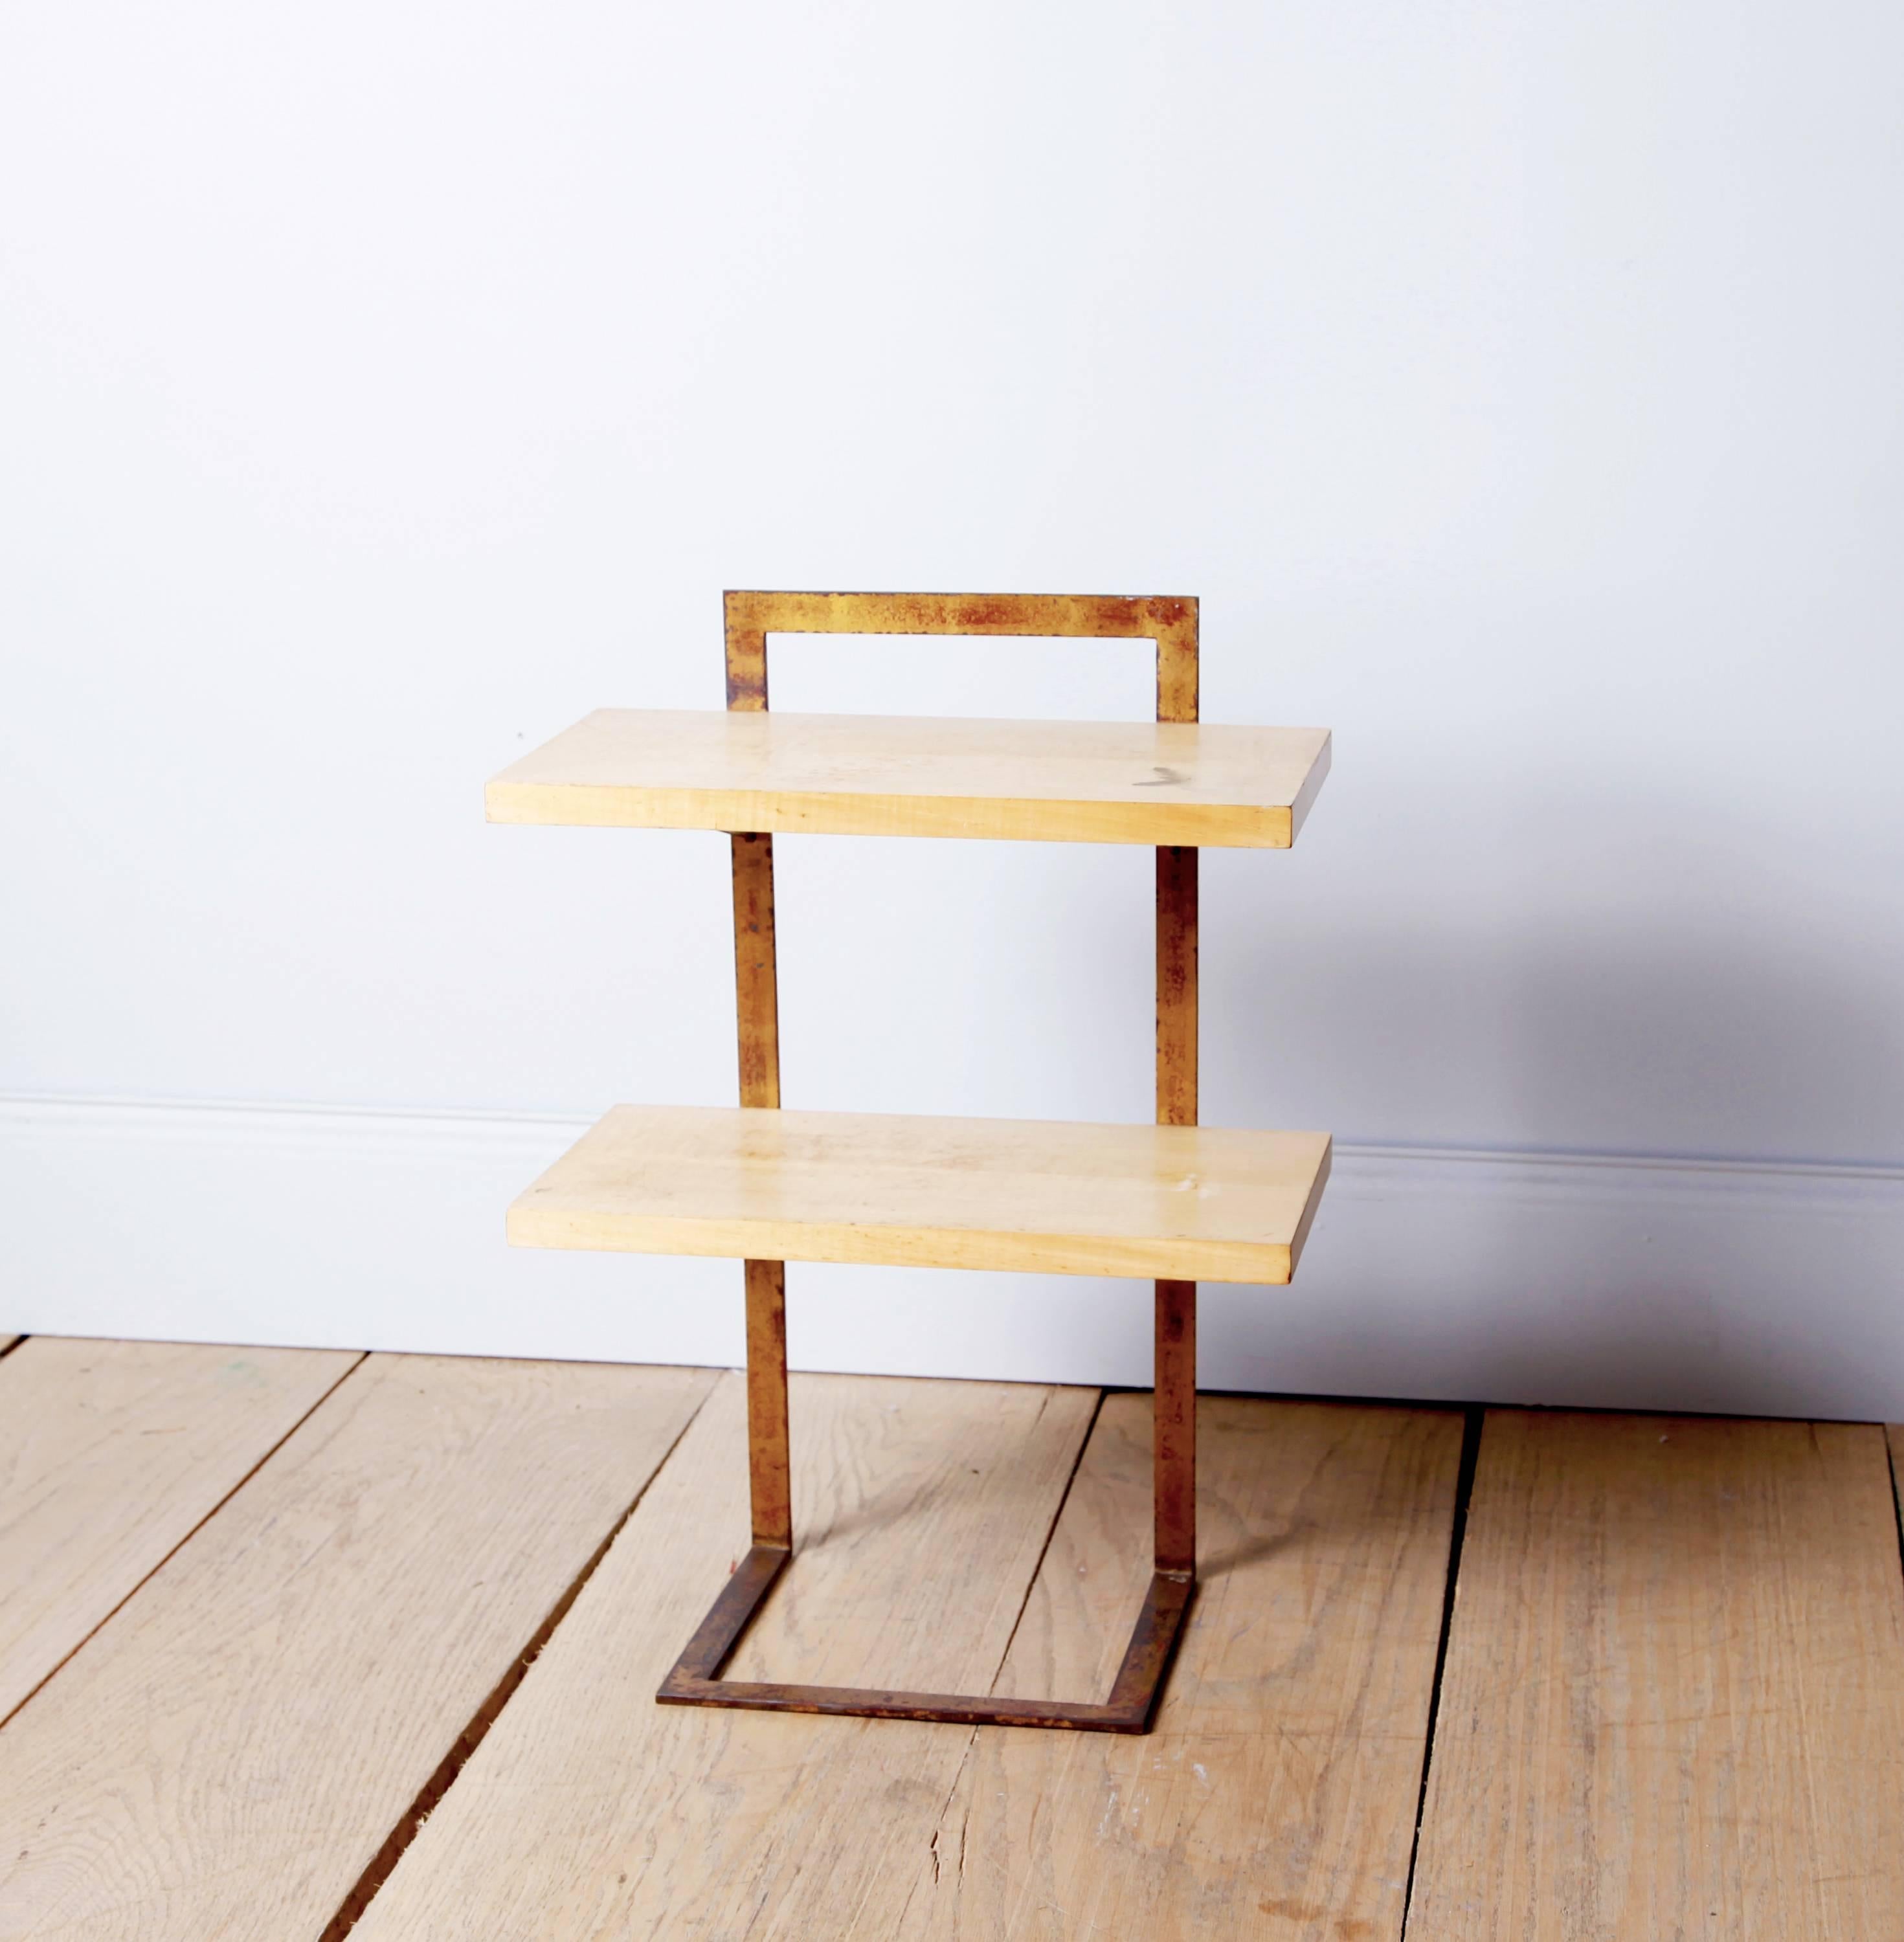 An exquisitely simple side table by the great self-taught French designer Jean Royère.